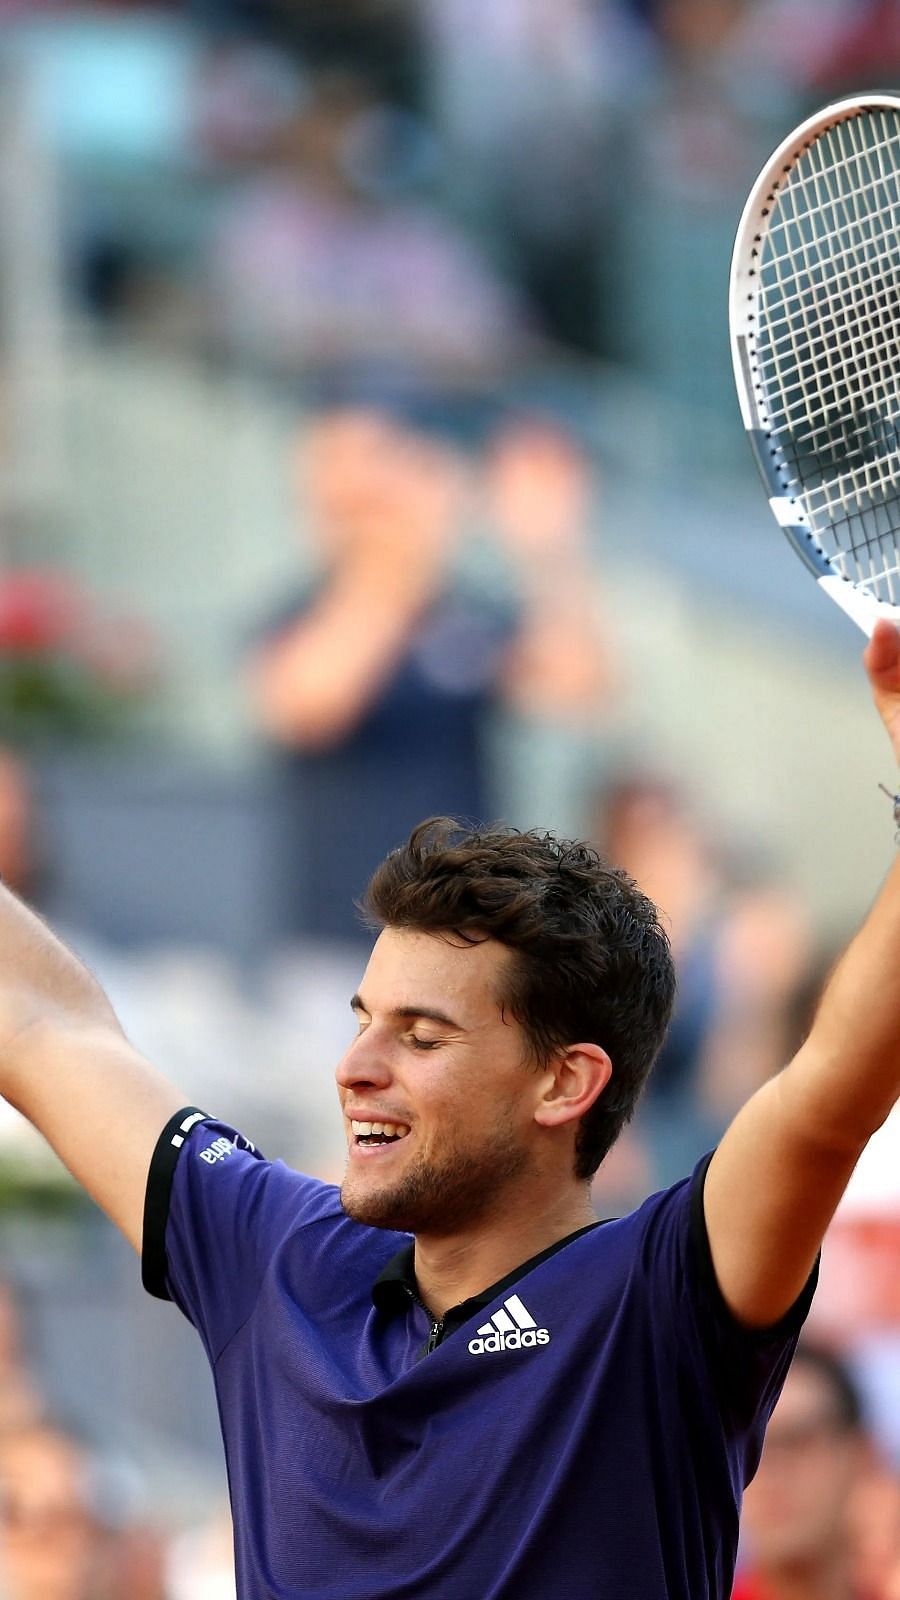 Dominic Thiem claims it took him a while to set new goals after USO win, jokes that hes at